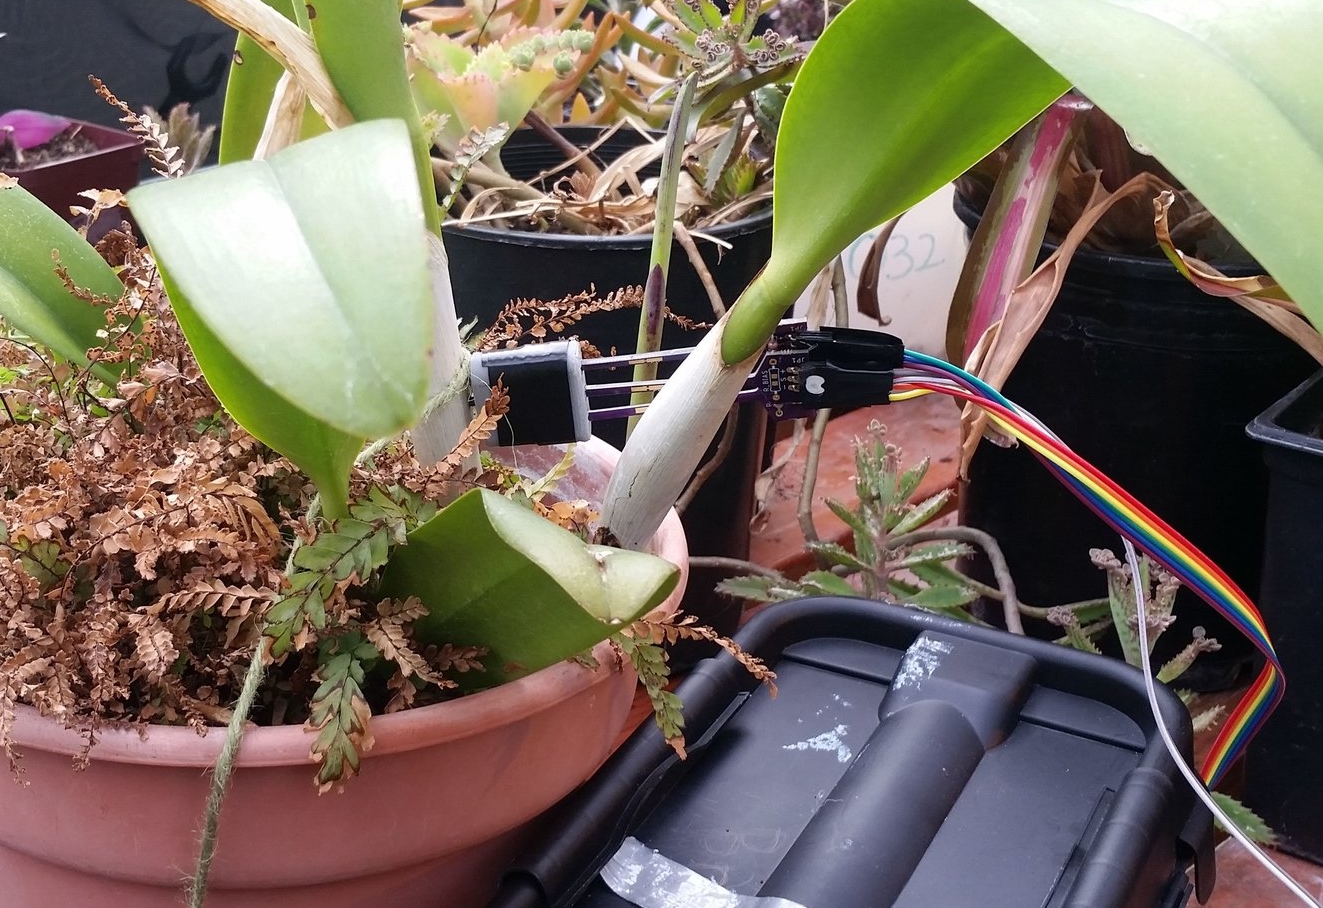 Probes installed in an Orchid. Notice the orientation of the probes, the pcbs are all facing the same direction.